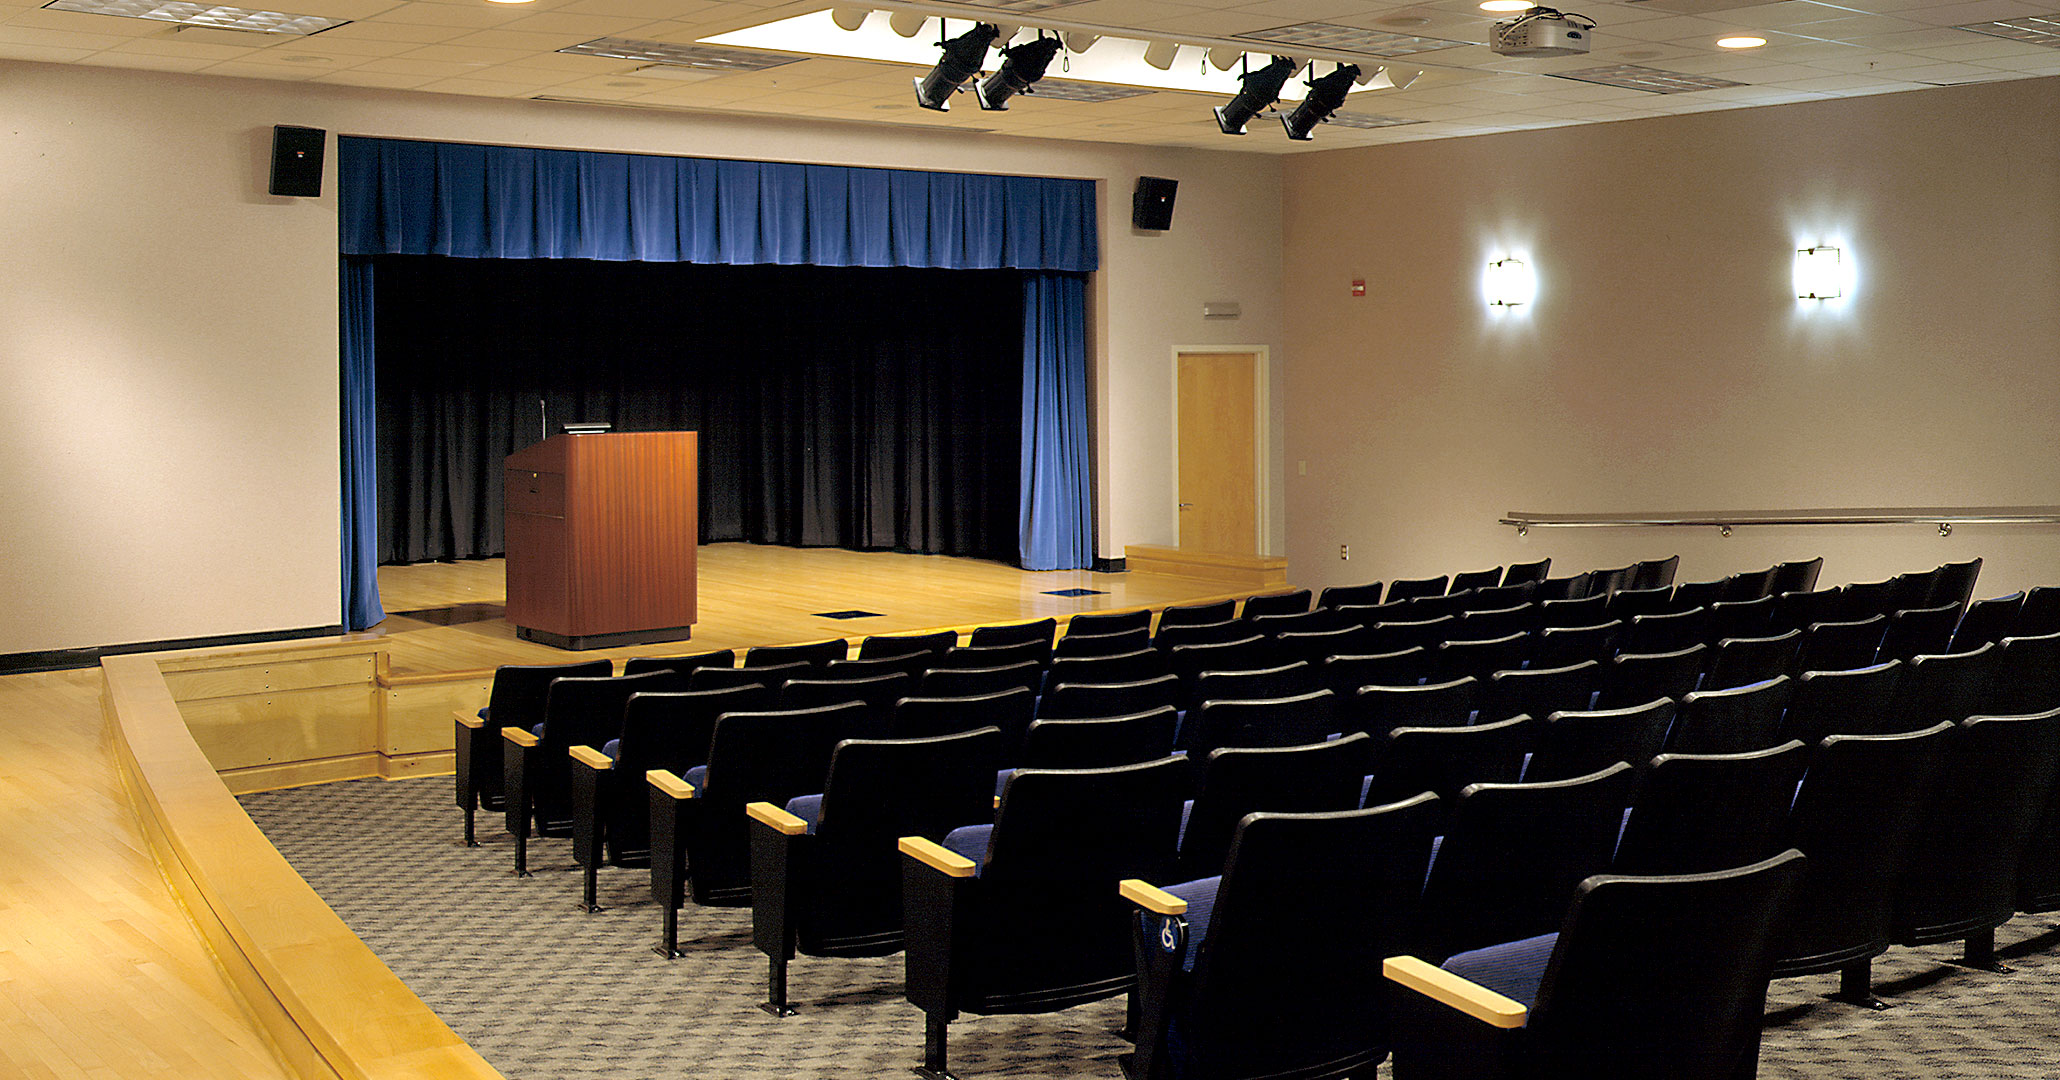 Midlands Technical College worked with Boudreaux architects to design auditorium classrooms for the Airport Campus.